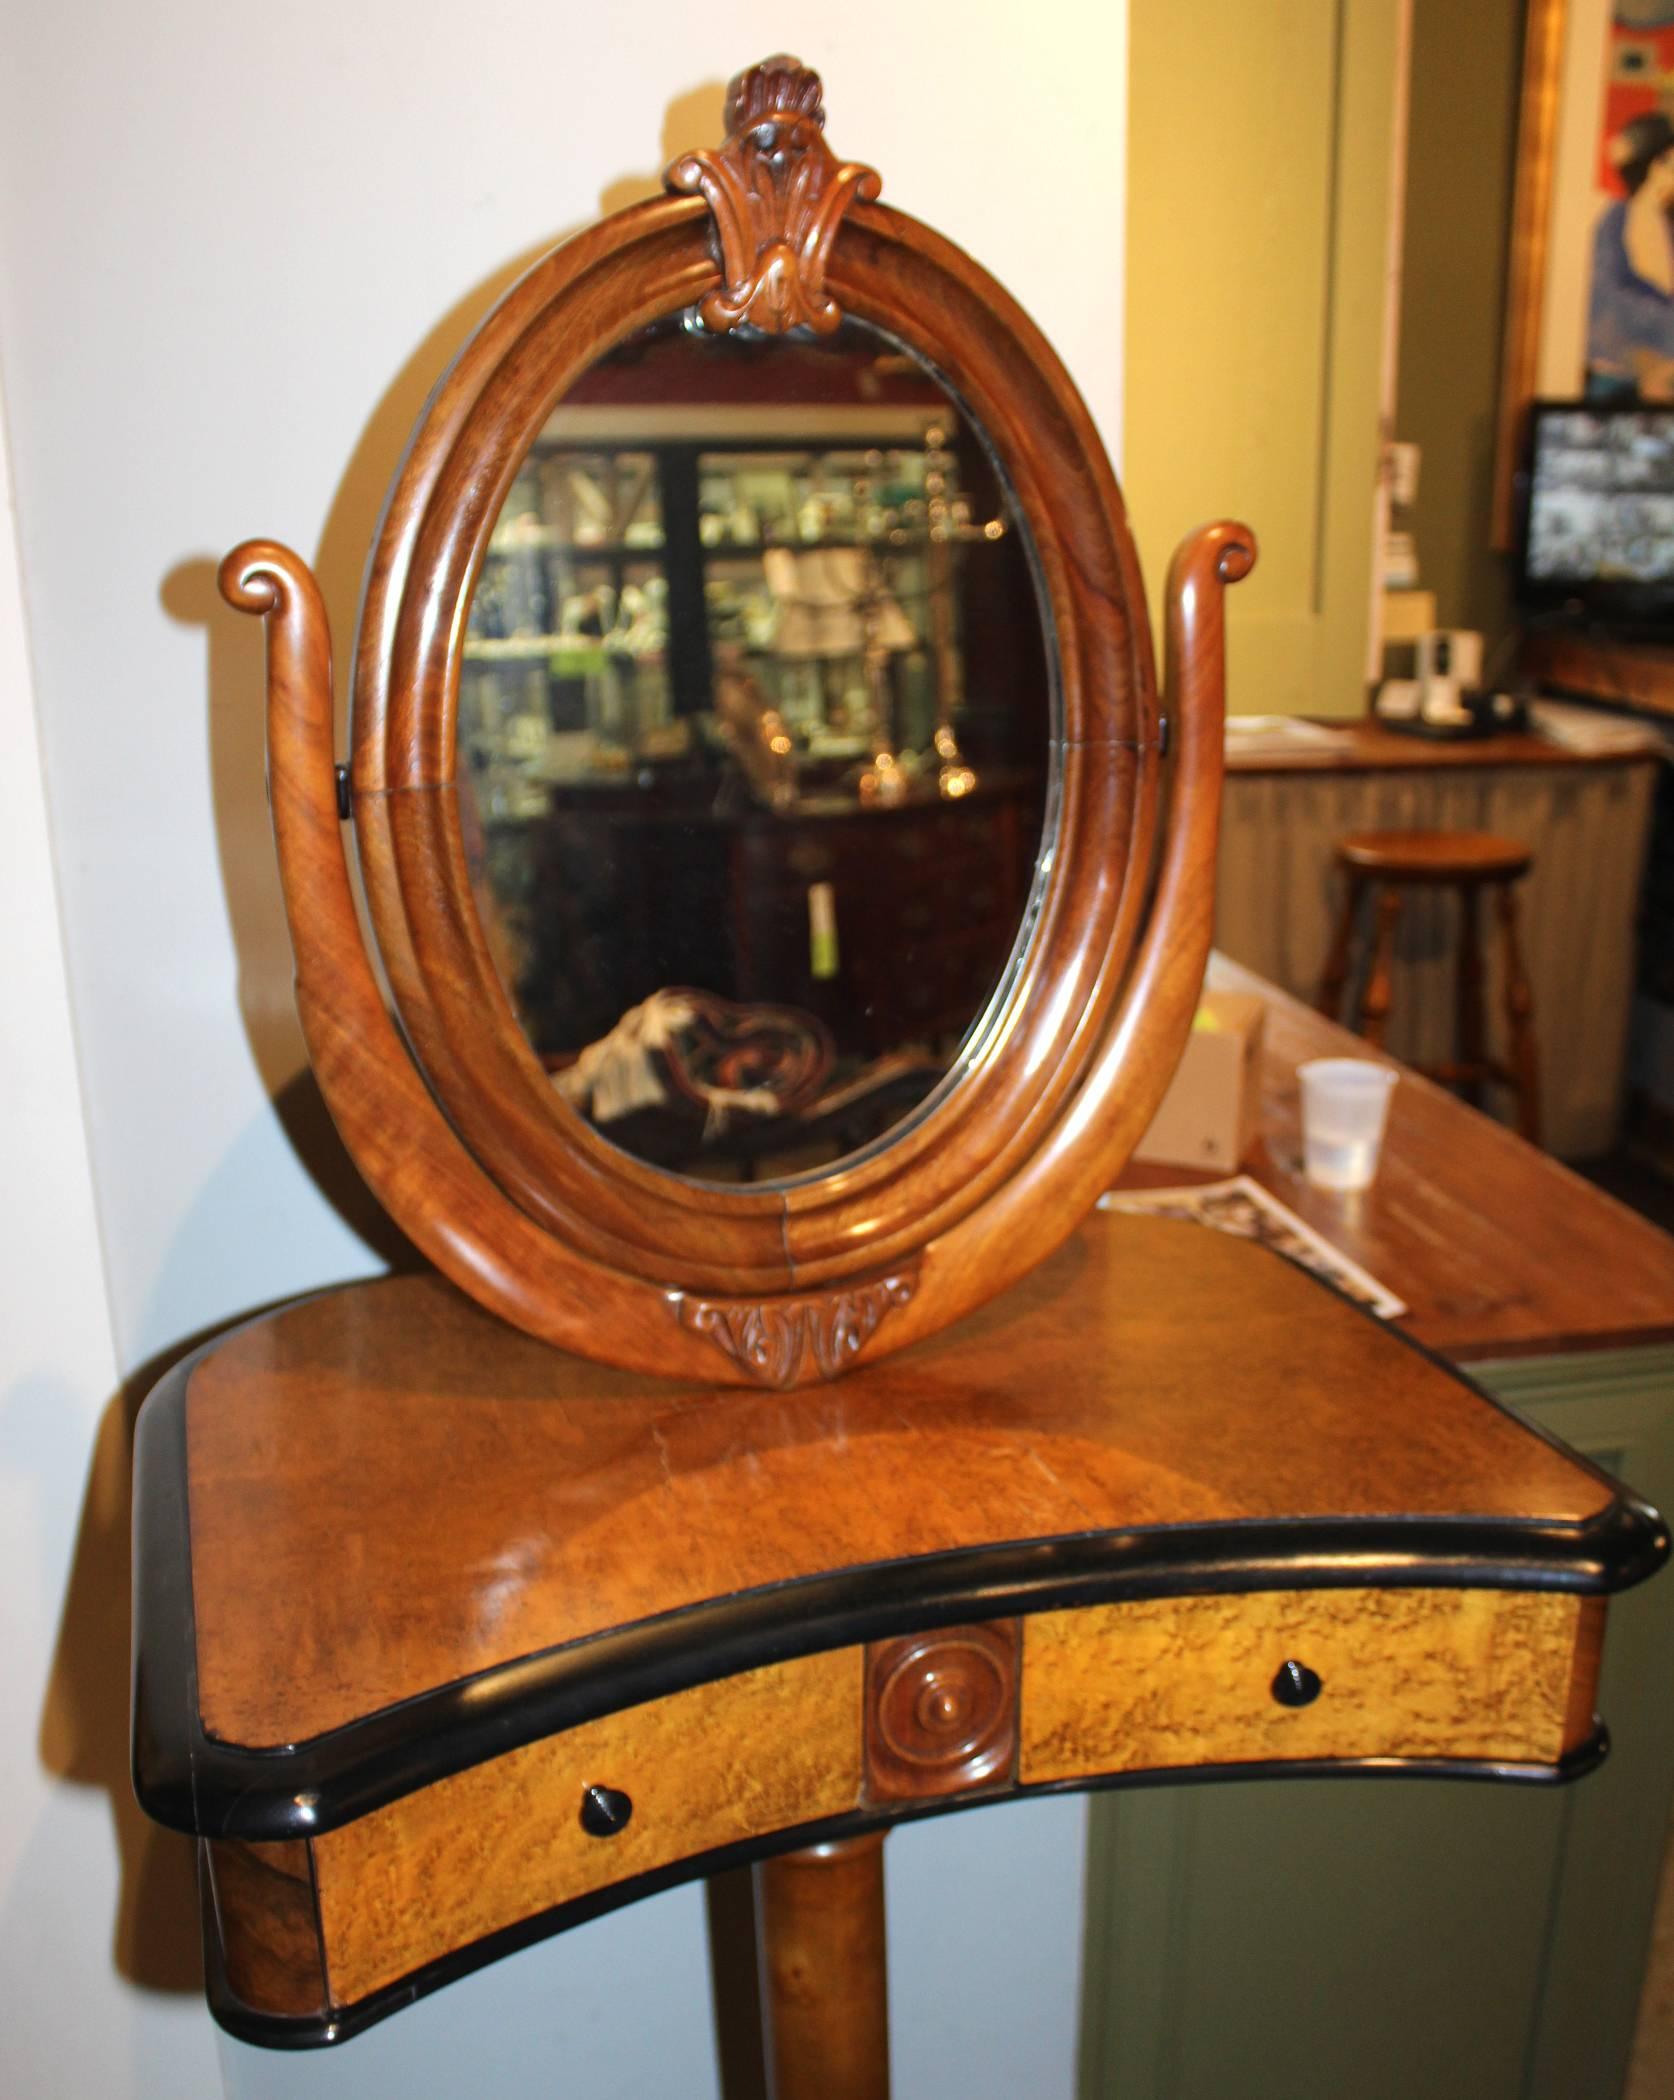 A 19th century Biedermeier two drawer shaving stand, with bird’s-eye maple veneer highlighted by ebonized mahogany, and an oval mirror in a carved mahogany frame. Supported by a columnar flame birch pedestal terminating with three foliate and scroll